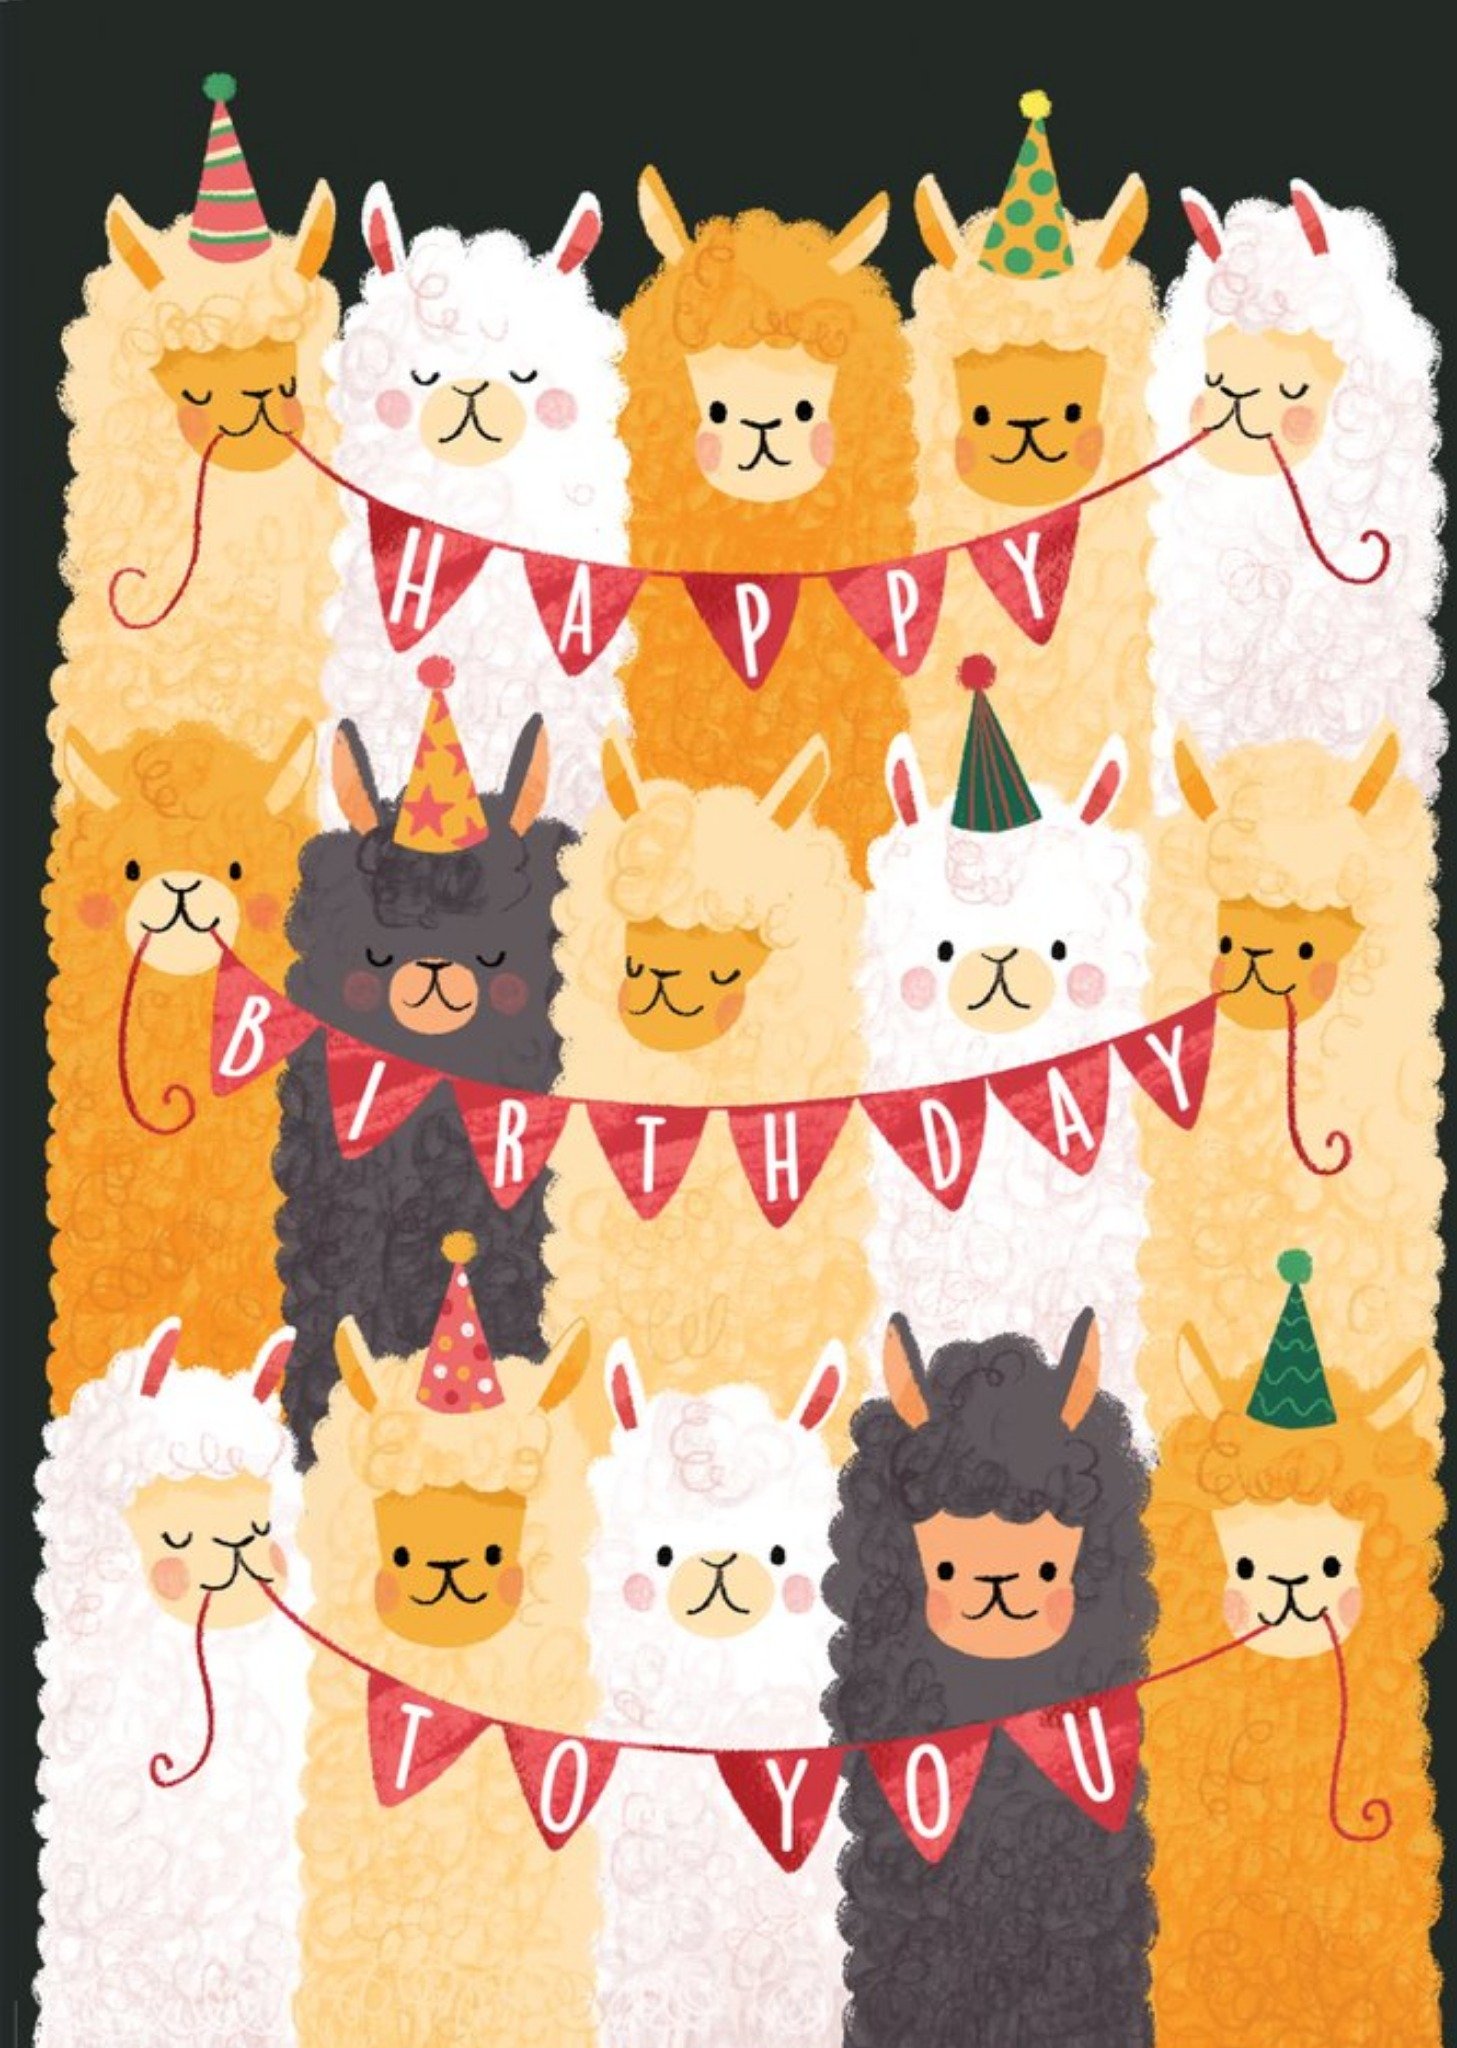 Moonpig Illustration Of A Group Of Alpacas With Buntings Birthday Card, Large